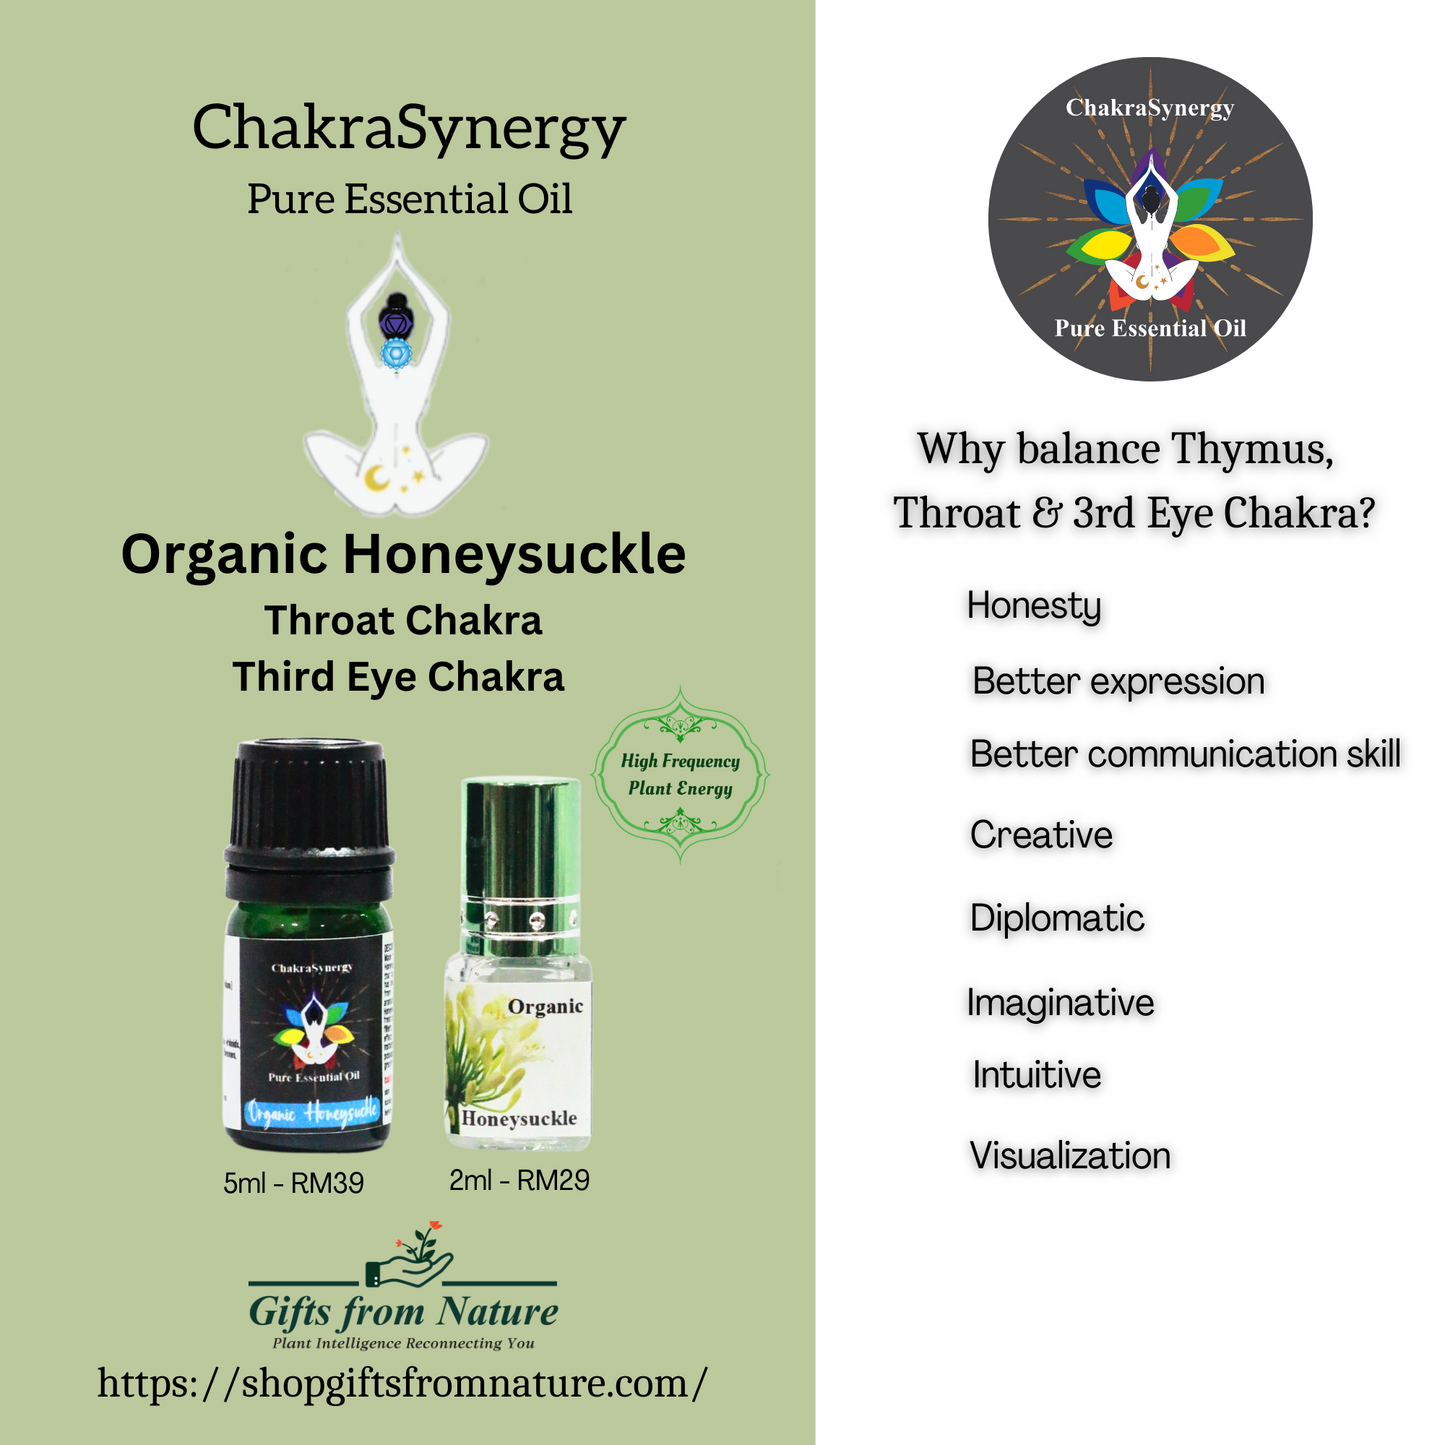 Bundle Of Divinity Chakra Synergy  High Frequency Pure Essential Oil (FREE GIFT INCLUDED)